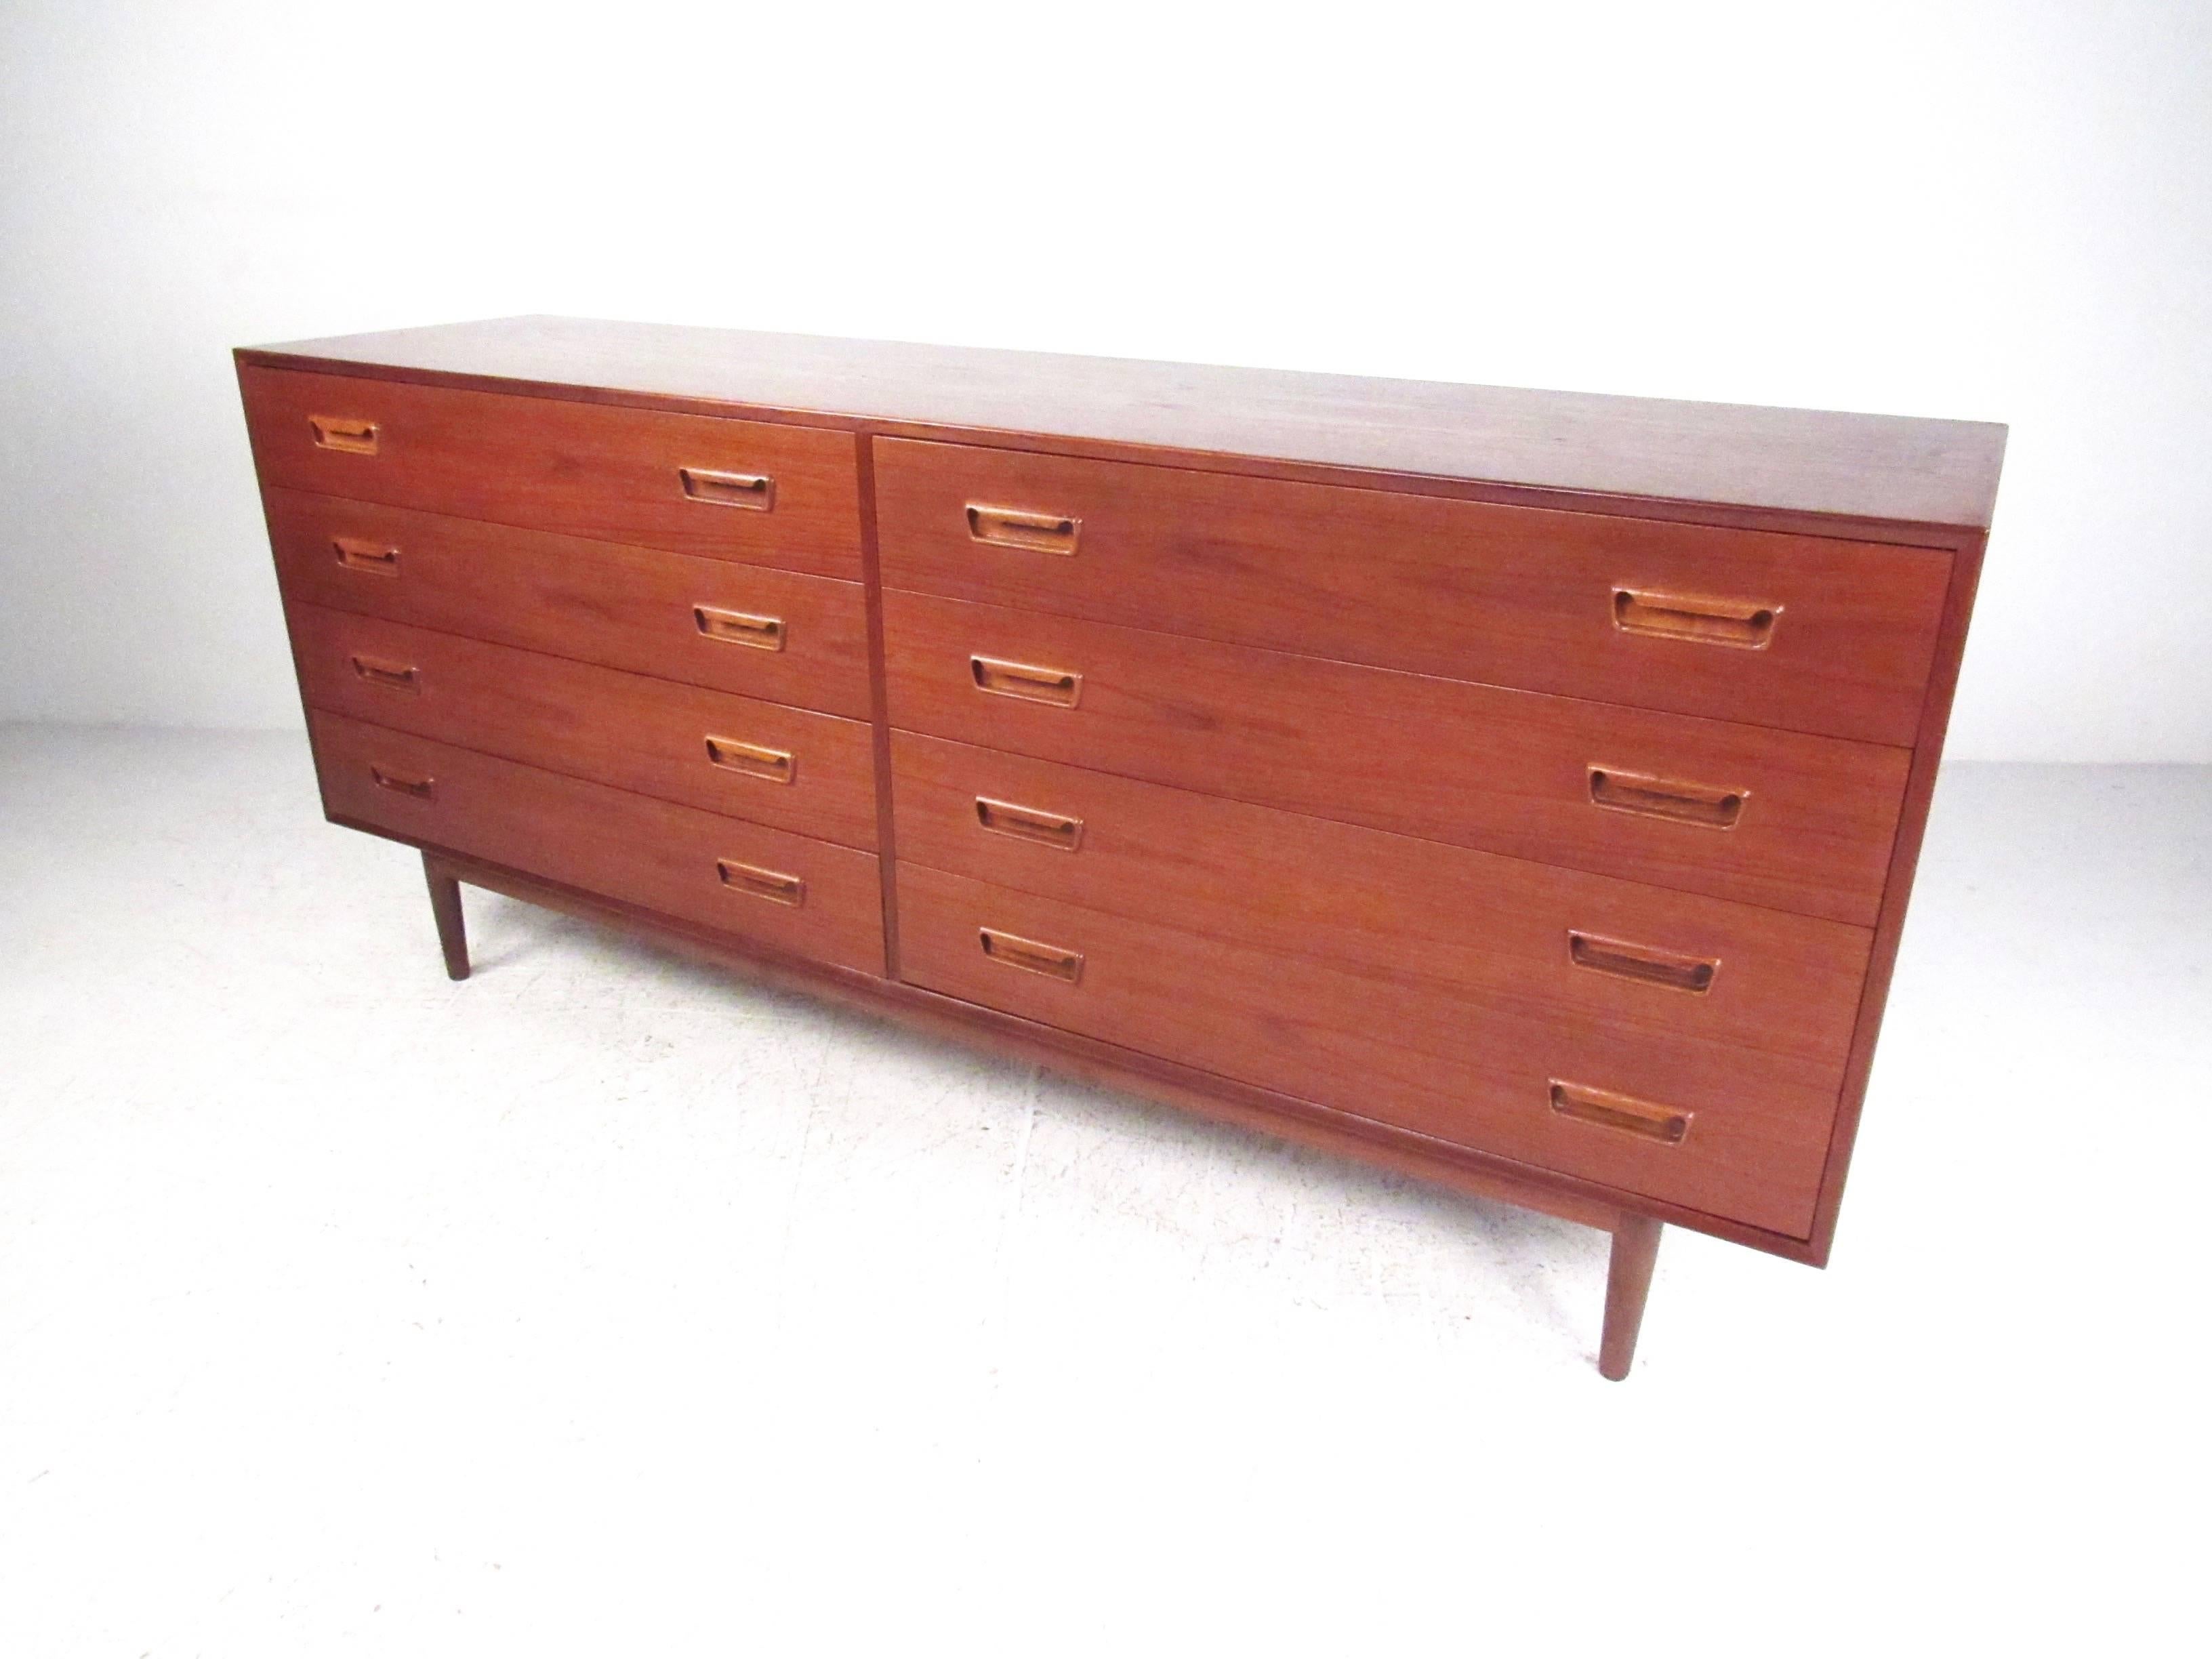 This stunning Mid-Century Modern dresser features spacious eight-drawer construction, a rich vintage finish, and lovely sculpted drawer pulls. Dovetailed joints and tapered legs showcase the quality Scandinavian craftsmanship of the piece. Please